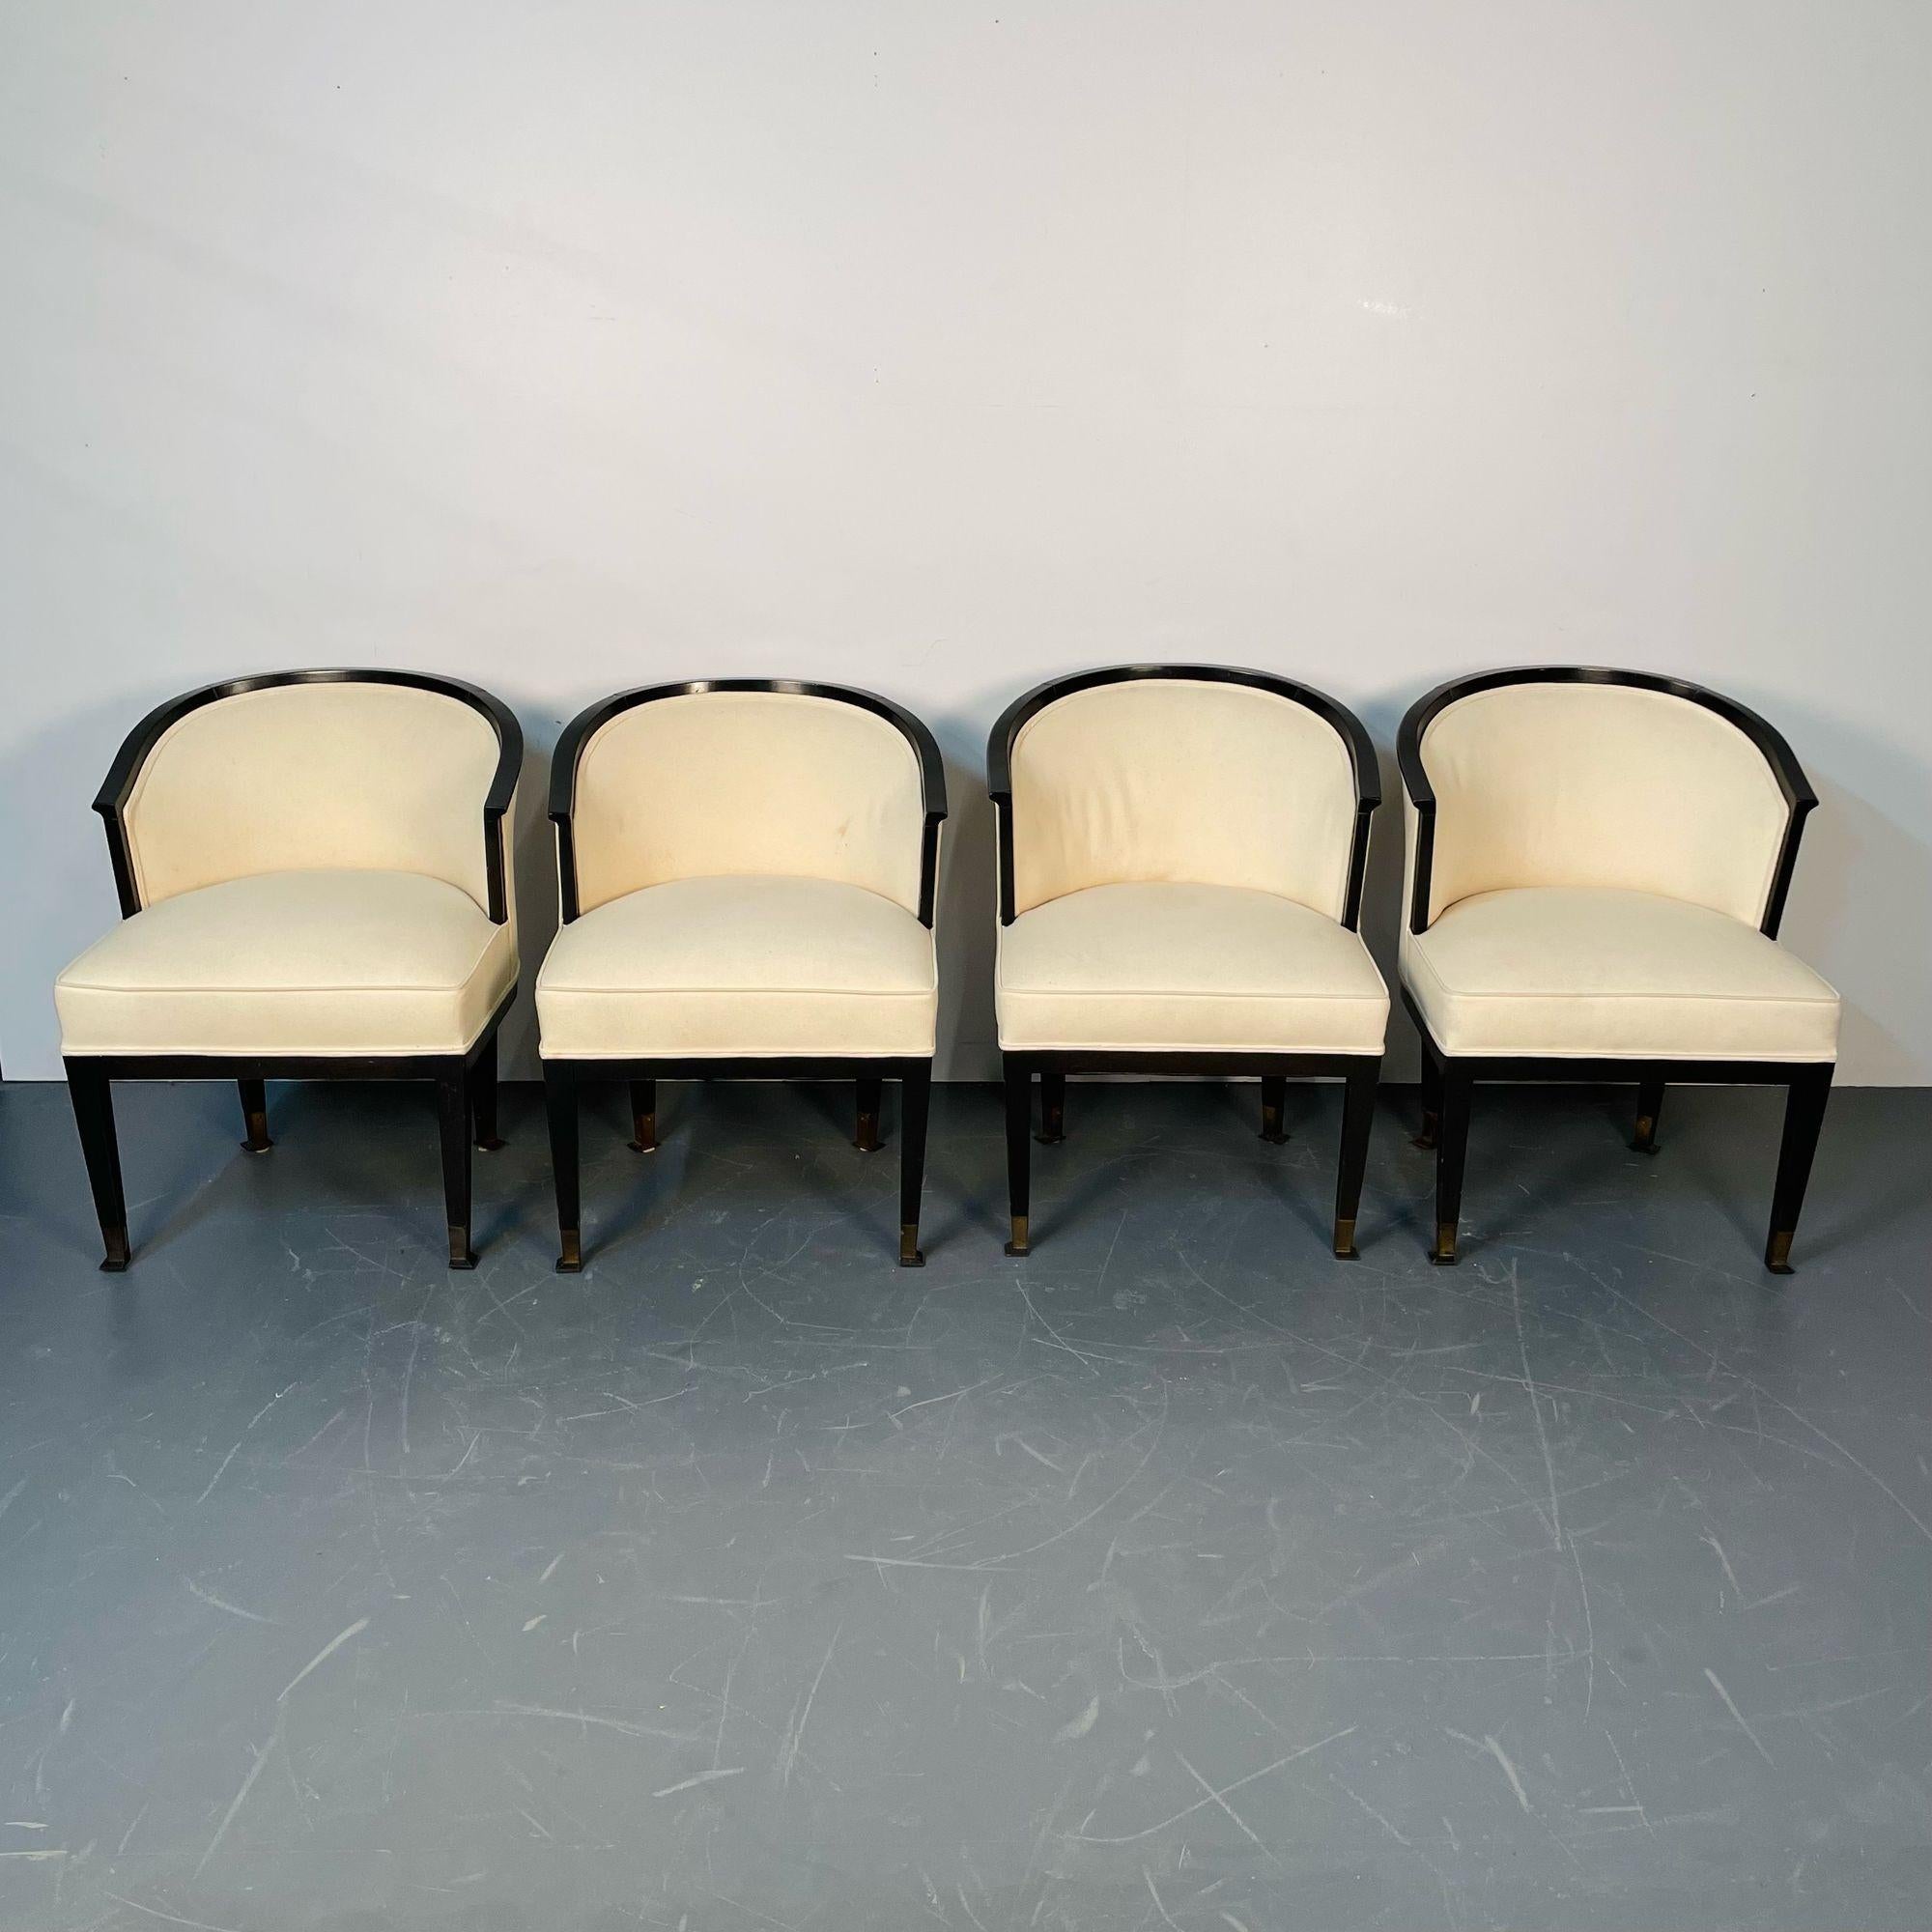 Set of Four French Art Deco Barrel Back Club Chairs / Bergeres, Ruhlman Style In Good Condition For Sale In Stamford, CT